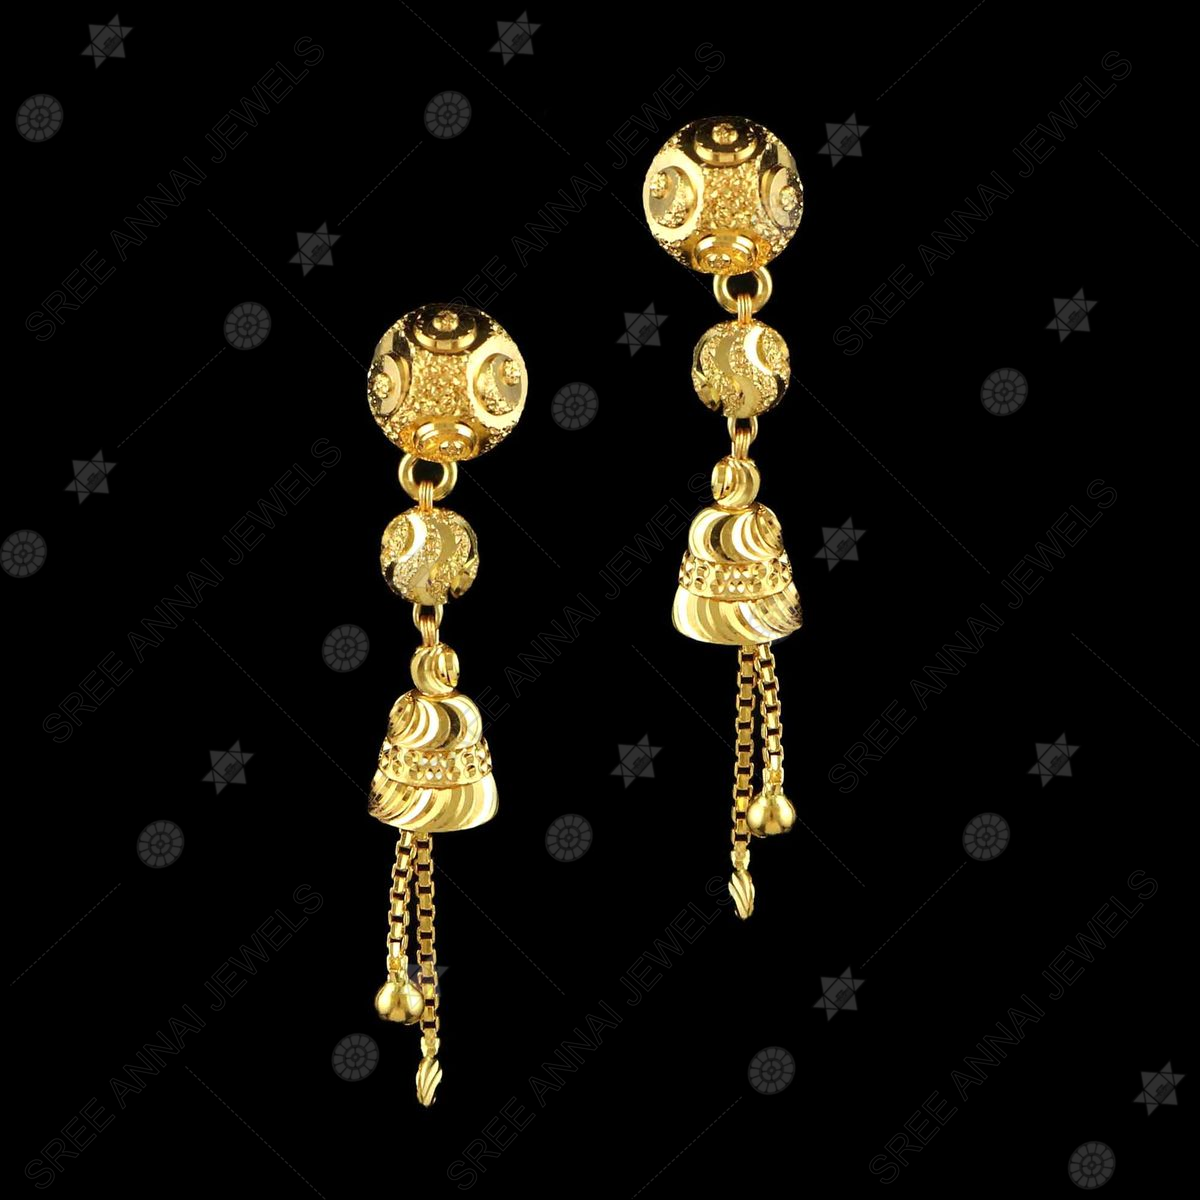 22ct 916HM Light weight casting earrings Weight 3.440grams Contact  8147195223 DM for more details.. Follow @ratan.jewels Admin… | Instagram